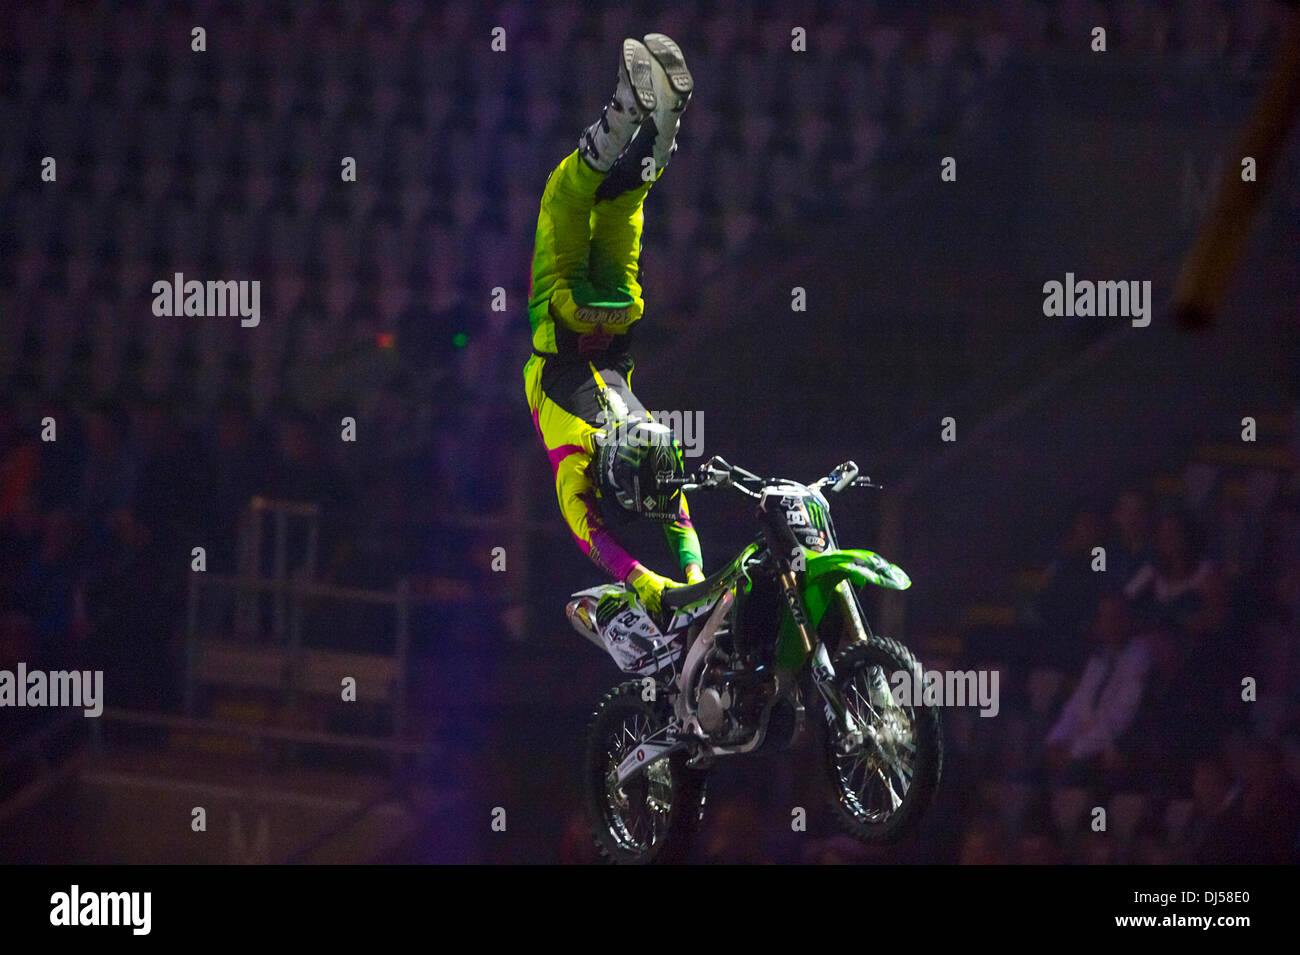 Oslo, Norway. 21st November 2013. Andre Villa does a super man seat grab freestyle motocross trick during the Nitro Circus Live 2013 at the Telenor Arena